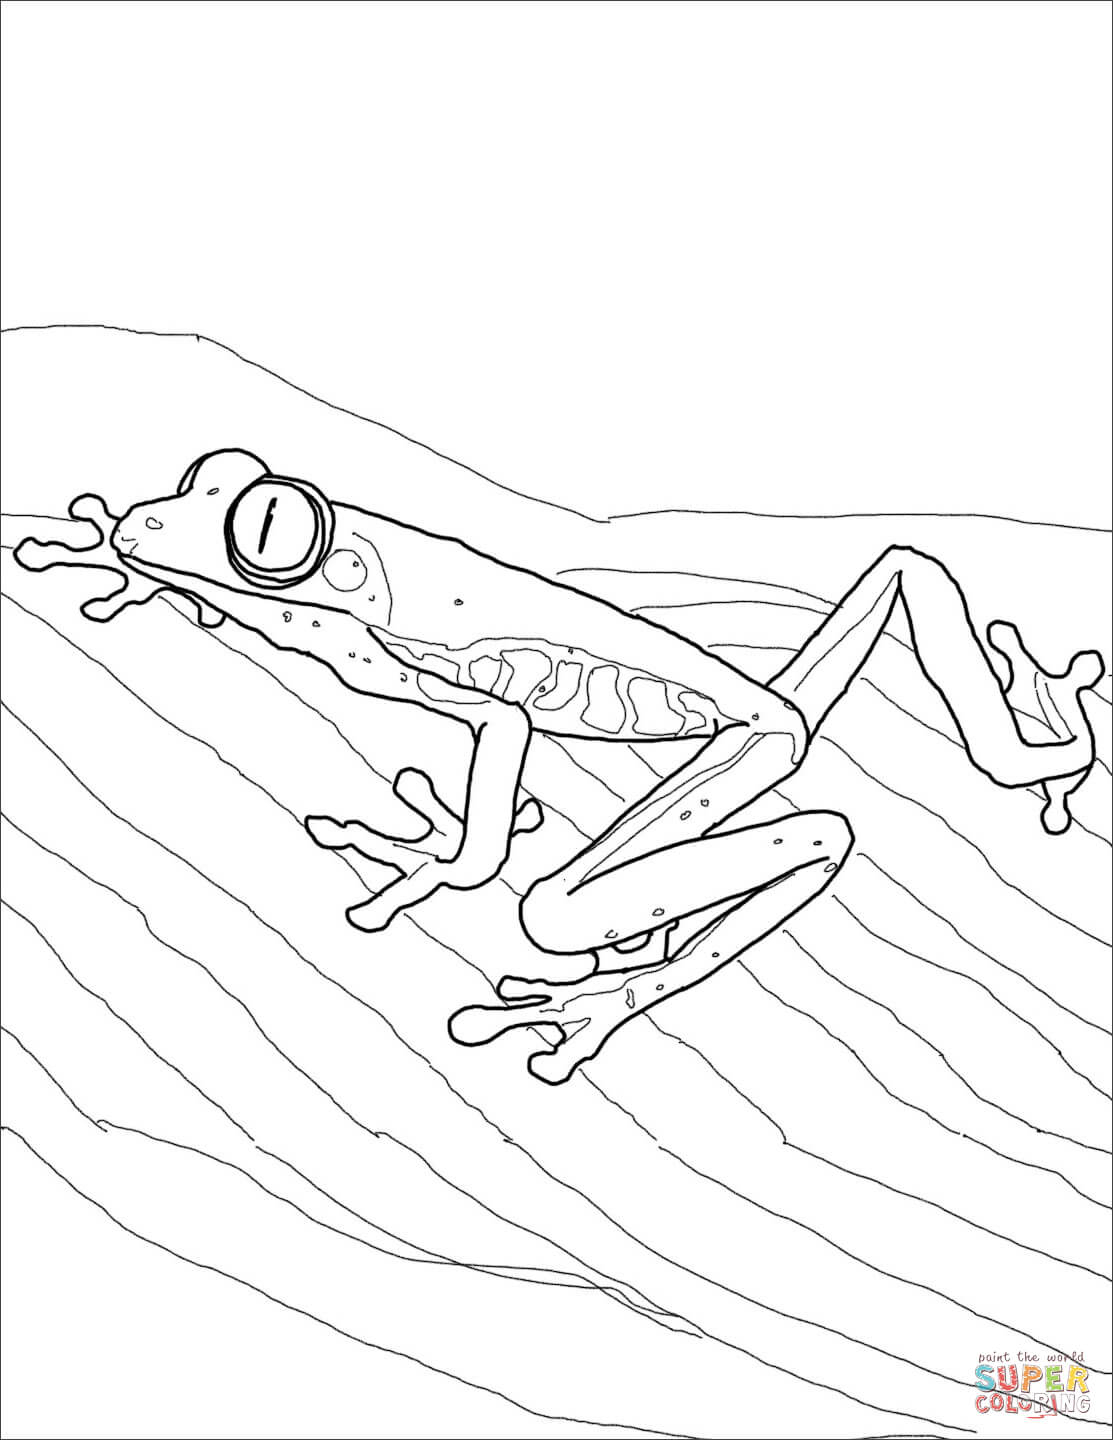 Rainforest Frog Coloring Page Red Eyed Tree Frog Coloring Page Free Printable Coloring Pages